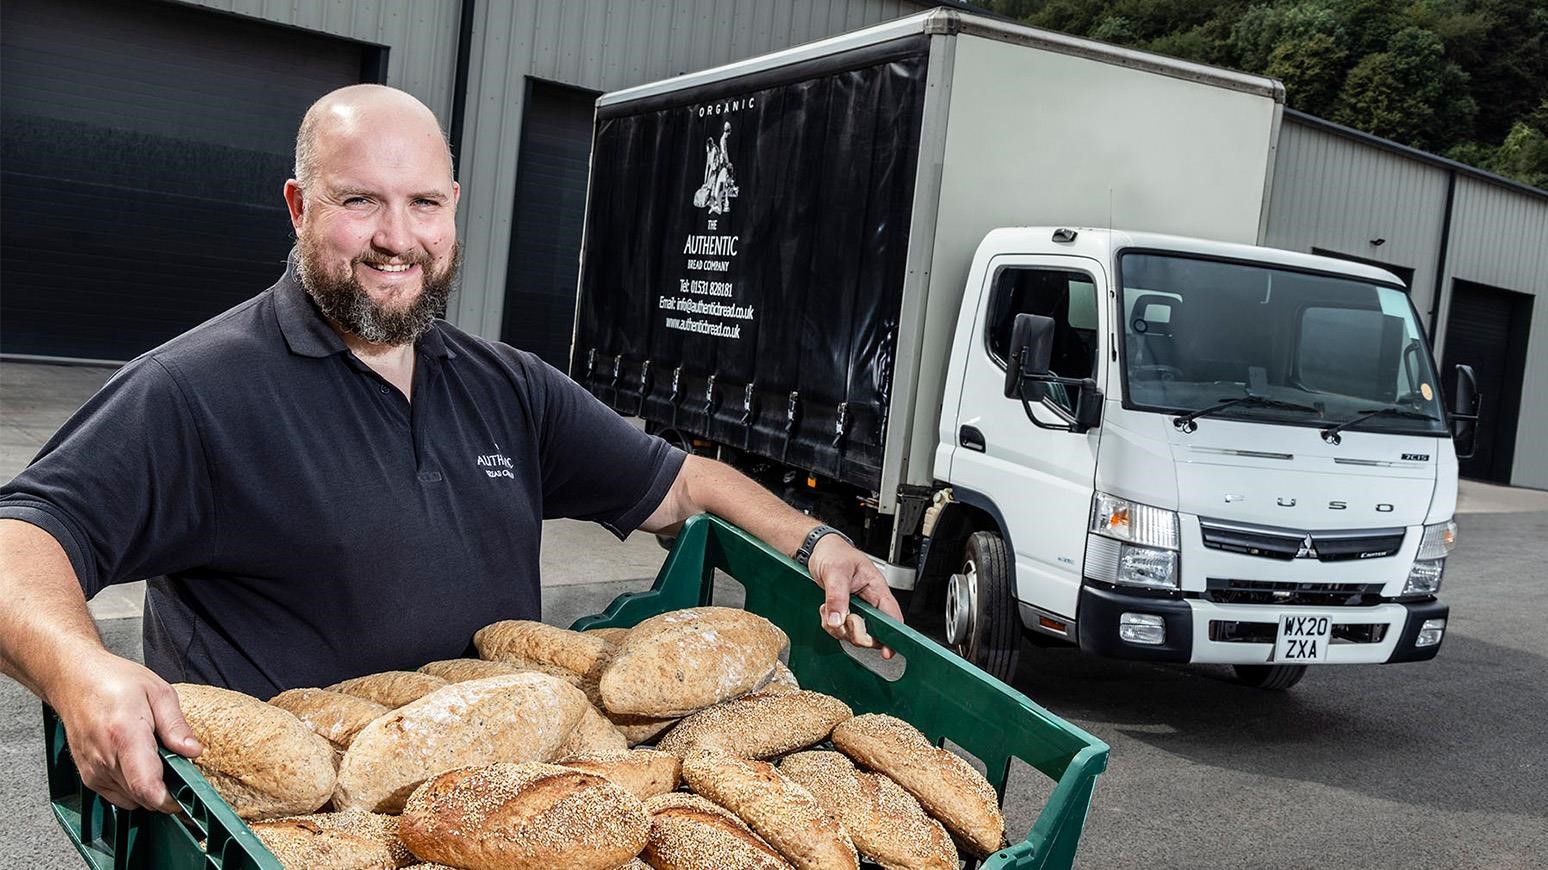 FUSO Canter Delivers For The Authentic Bread Company